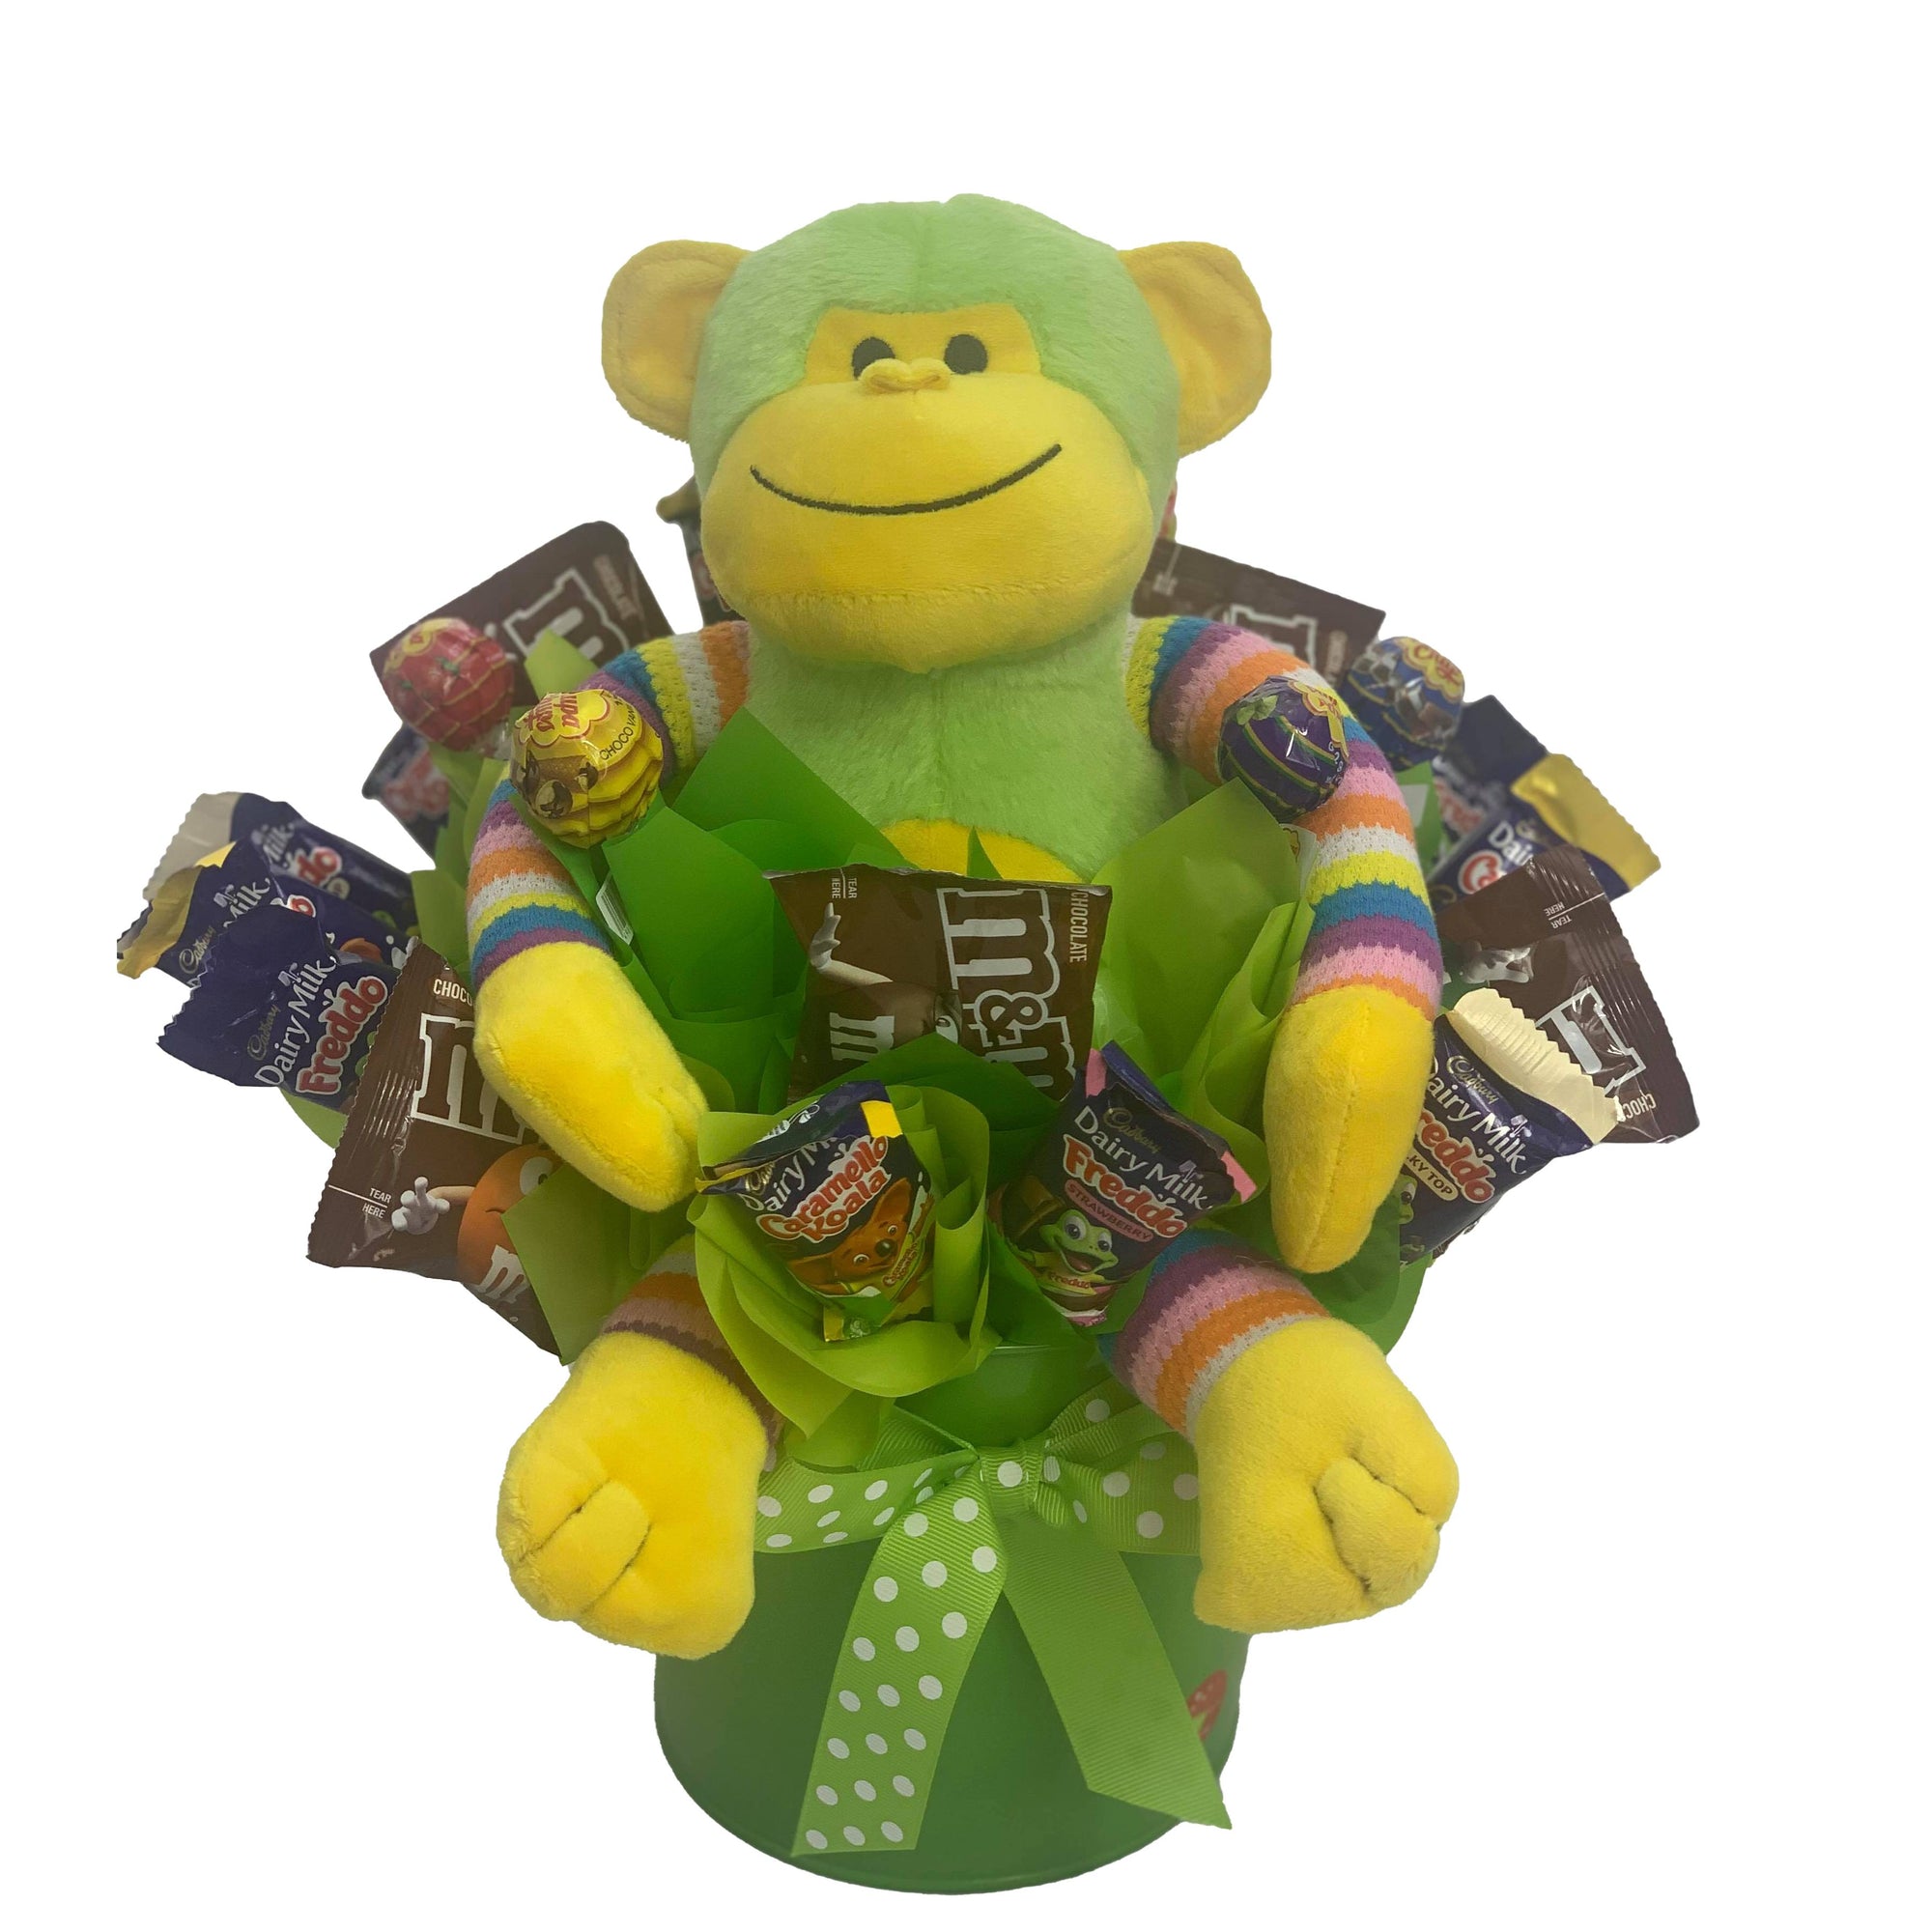 Blue Monkey in a metal tin surrounded by chocolate and lollies